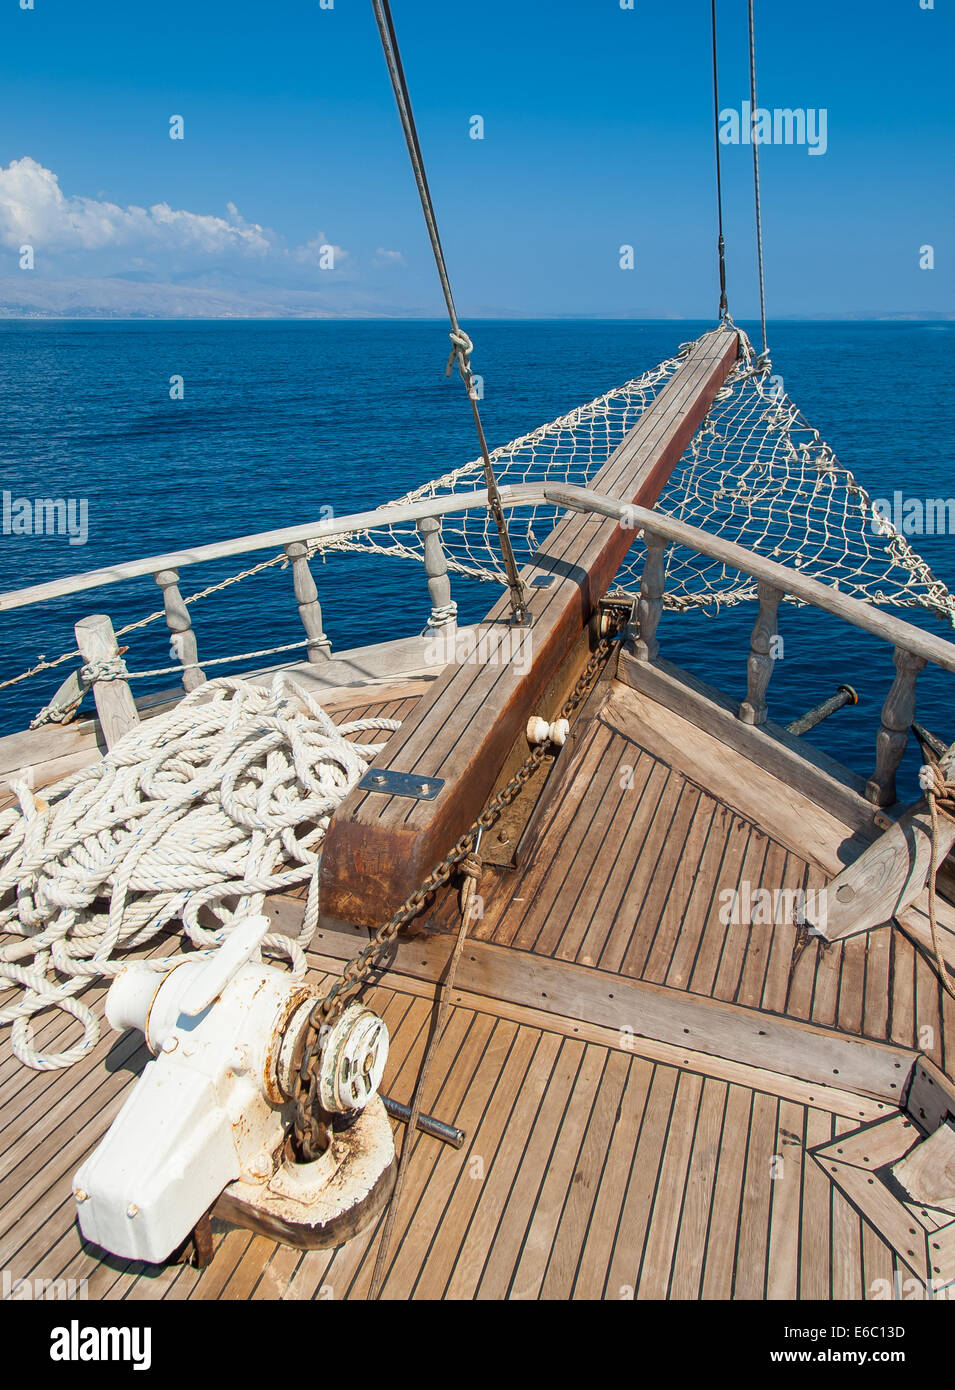 the bow of a traditional wooden boat with teak deck, hardwood bowsprit with blue sea and blue sky behind Stock Photo